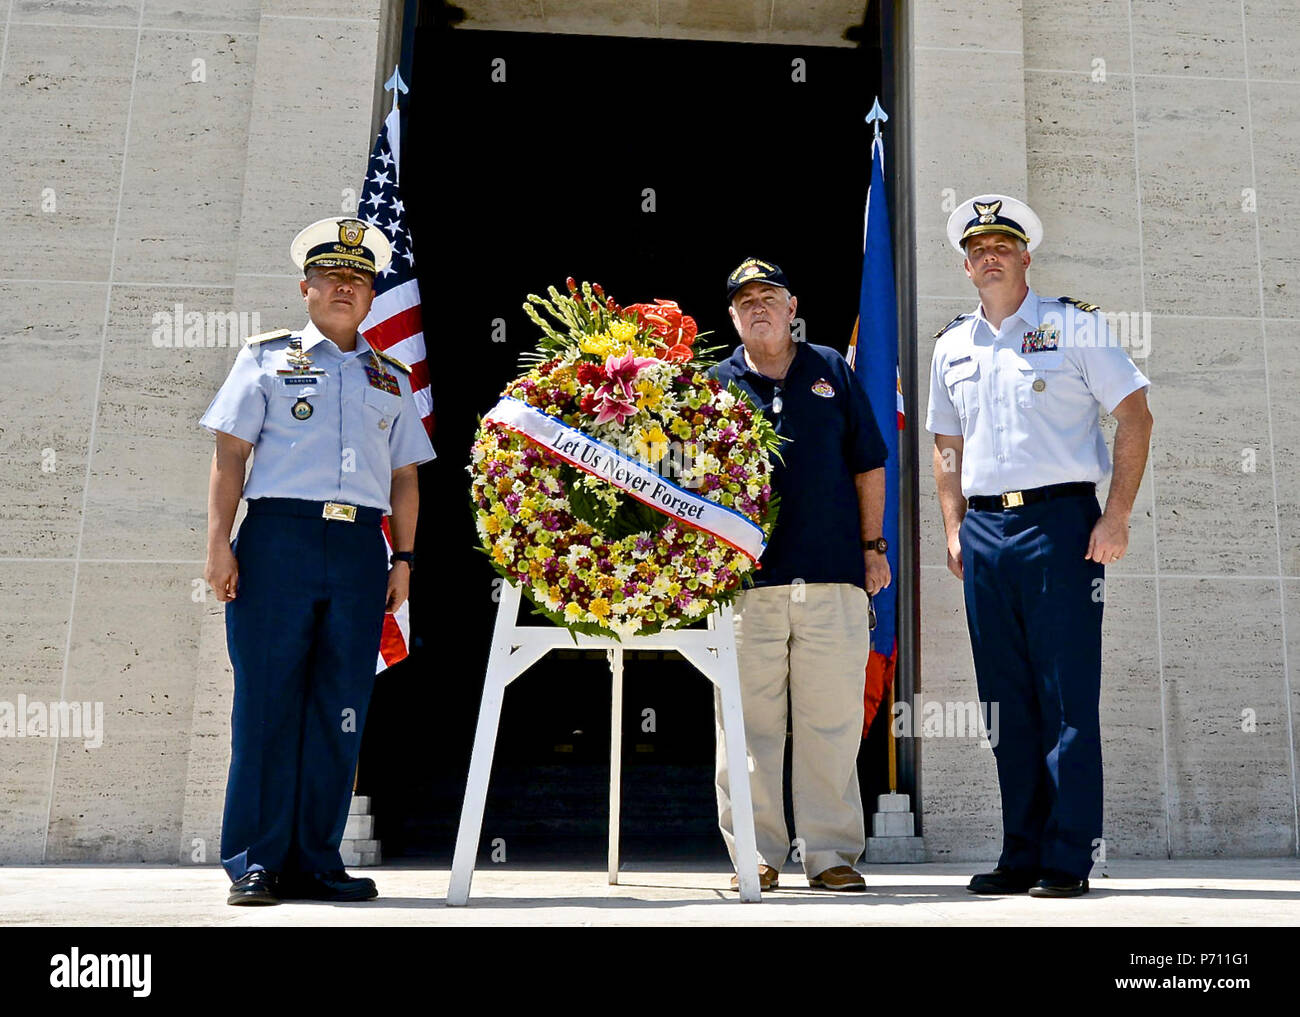 Officer-in-Charge Commodore Joel Garcia, Philippine coast guard, Lt. Cmdr, Jeremy Obenchain ,U.S. Coast Guard, maritime advisor Defense Threat Reduction Agency and U.S. Embassy, and Chief Petty Officer John O’Neil, U.S. Coast Guard Combat Veterans Association,  lay a wreath at the Military American Cemetery chapel, May 9, 2017. The ceremony was culminated with the reveal of  Lt. Crotty’s name now etched on the U.S. Coast Guard wall in the cemetery. Stock Photo